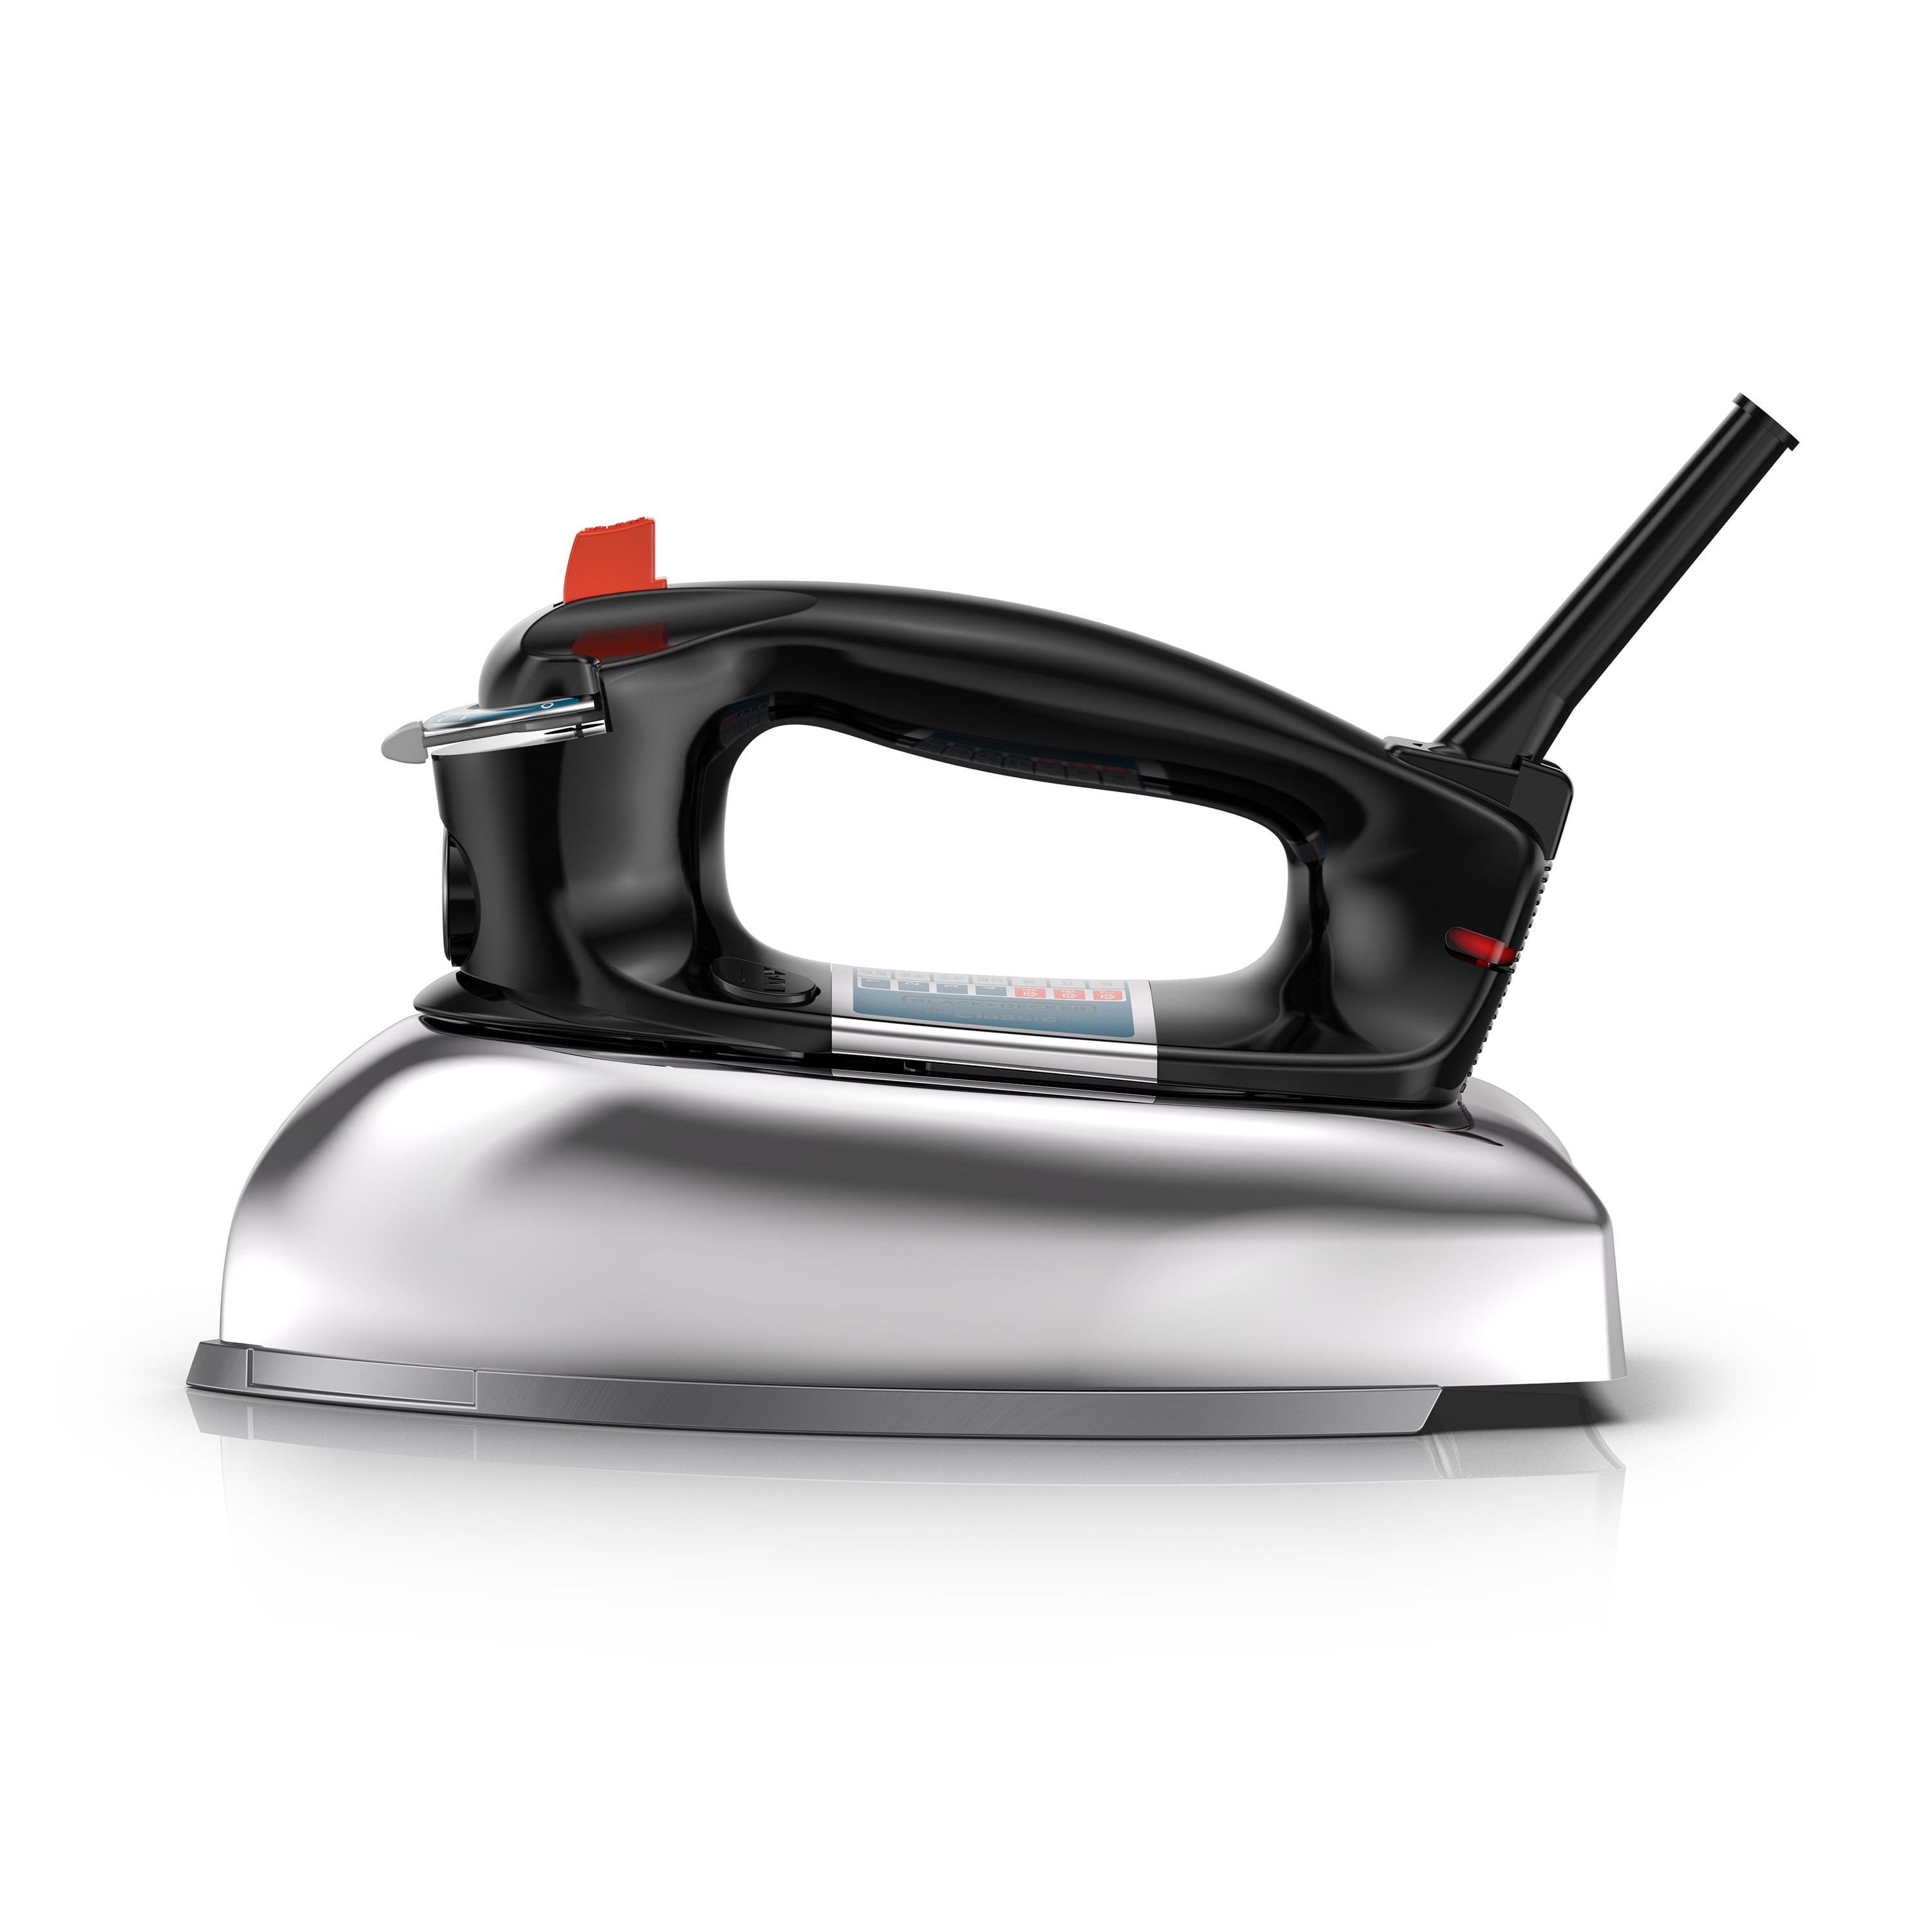 Black & Decker Classic Iron from Aircraft Spruce Europe